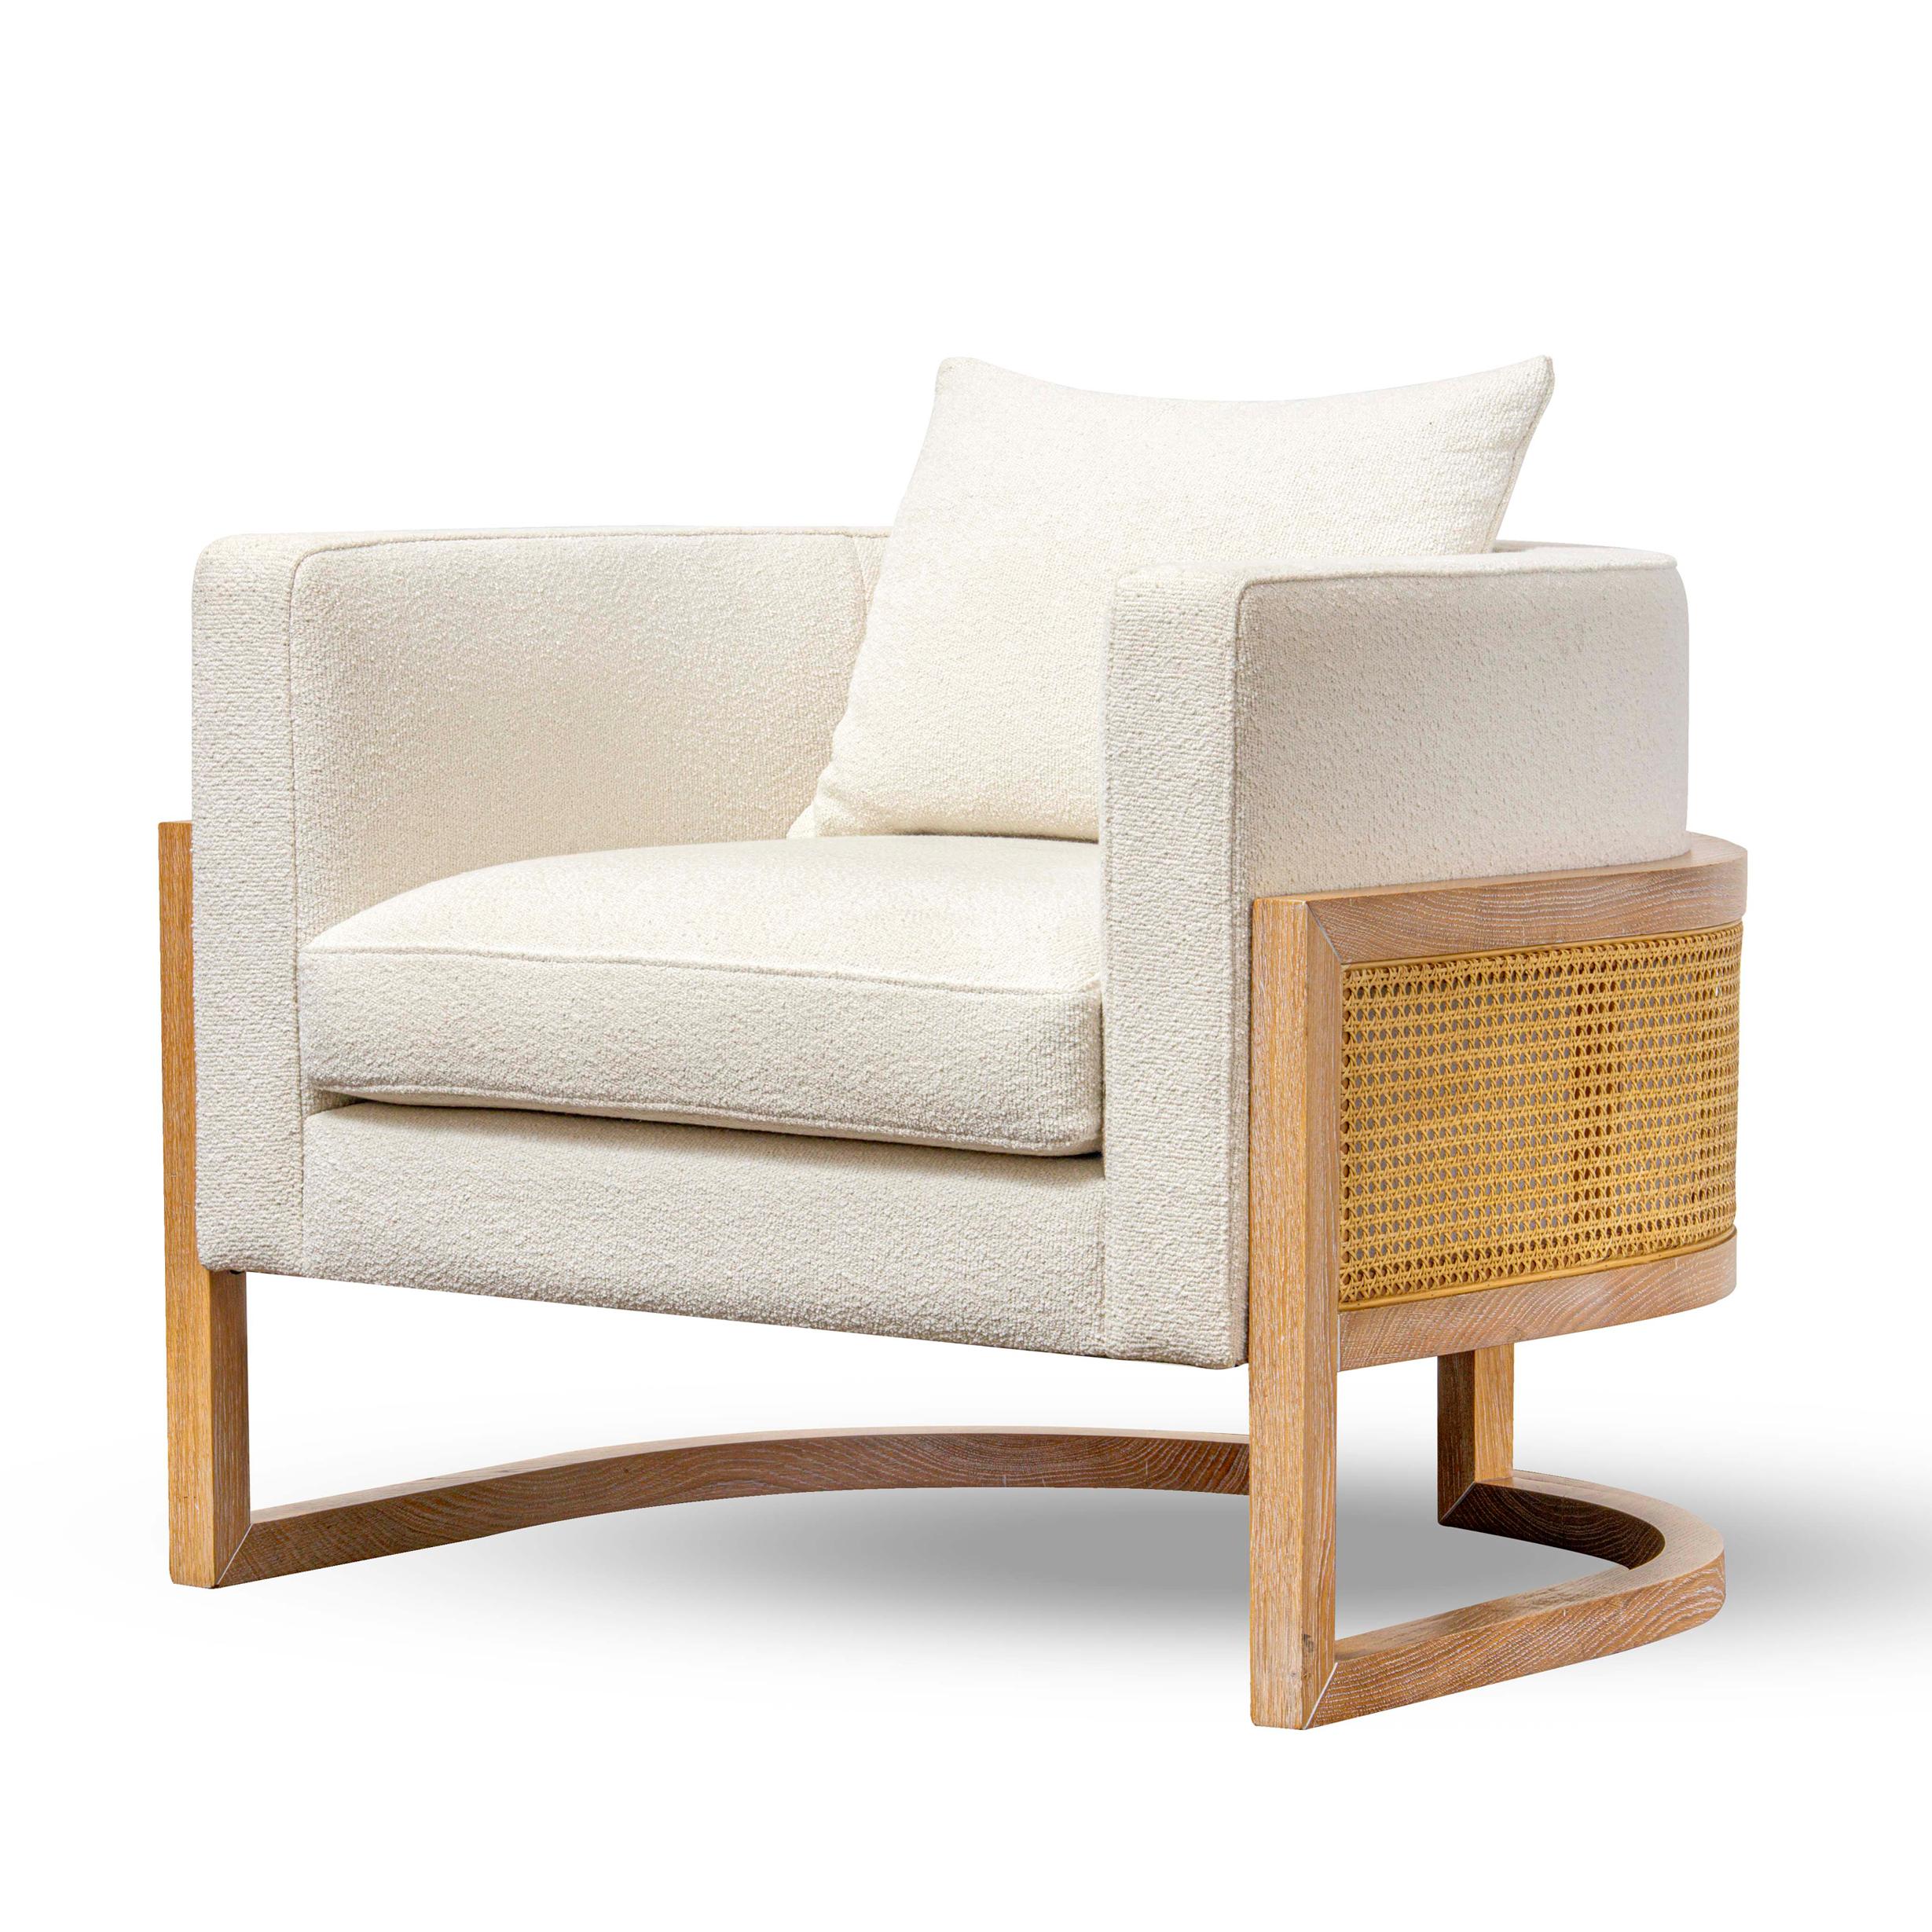 Julius Canned Armchair by Duistt
Dimensions: W 86 x D 84 x H 70 cm
Materials: Duistt Fabric, Oak, Natural Cane
Notes: One back cushion included

The JULIUS caned armchair, crafted with great attention to detail, gives us clean and modern lines